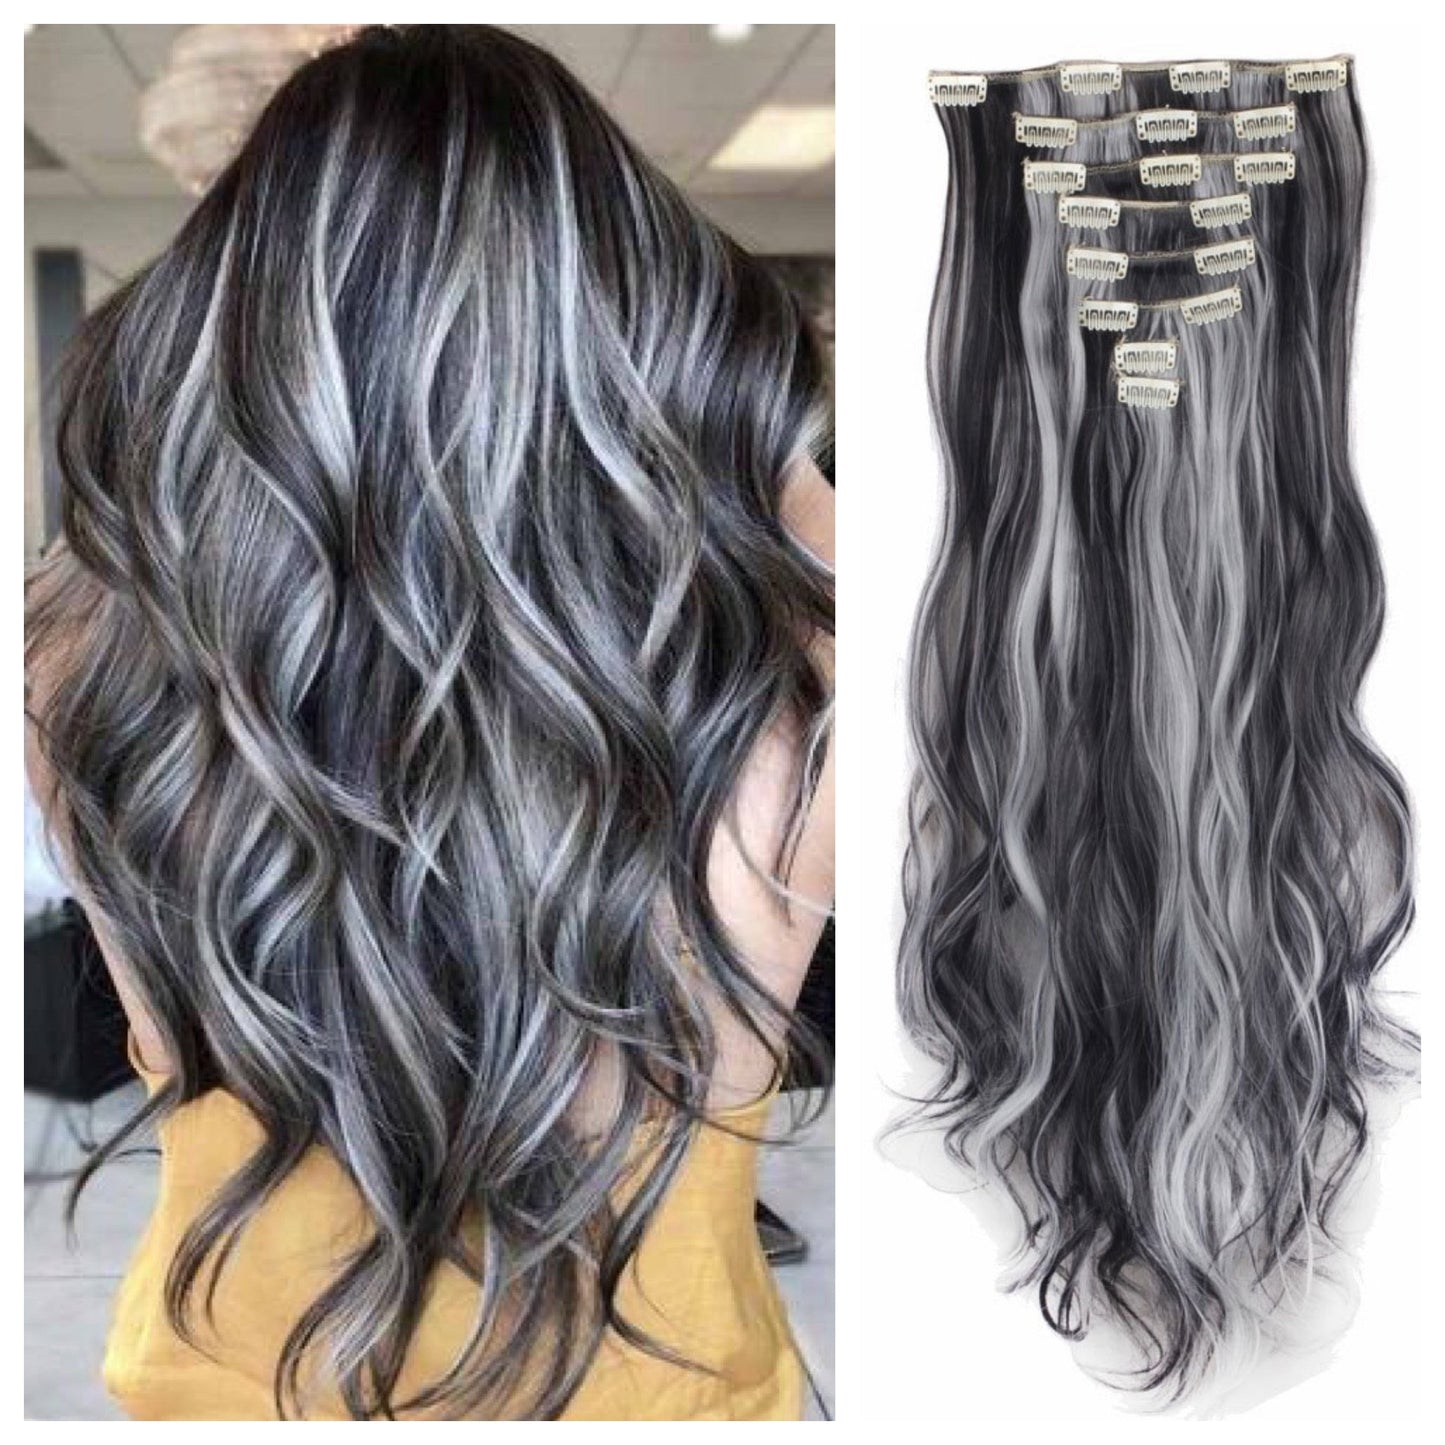 Black Hair with Silver Highlights Hair Extensions 24